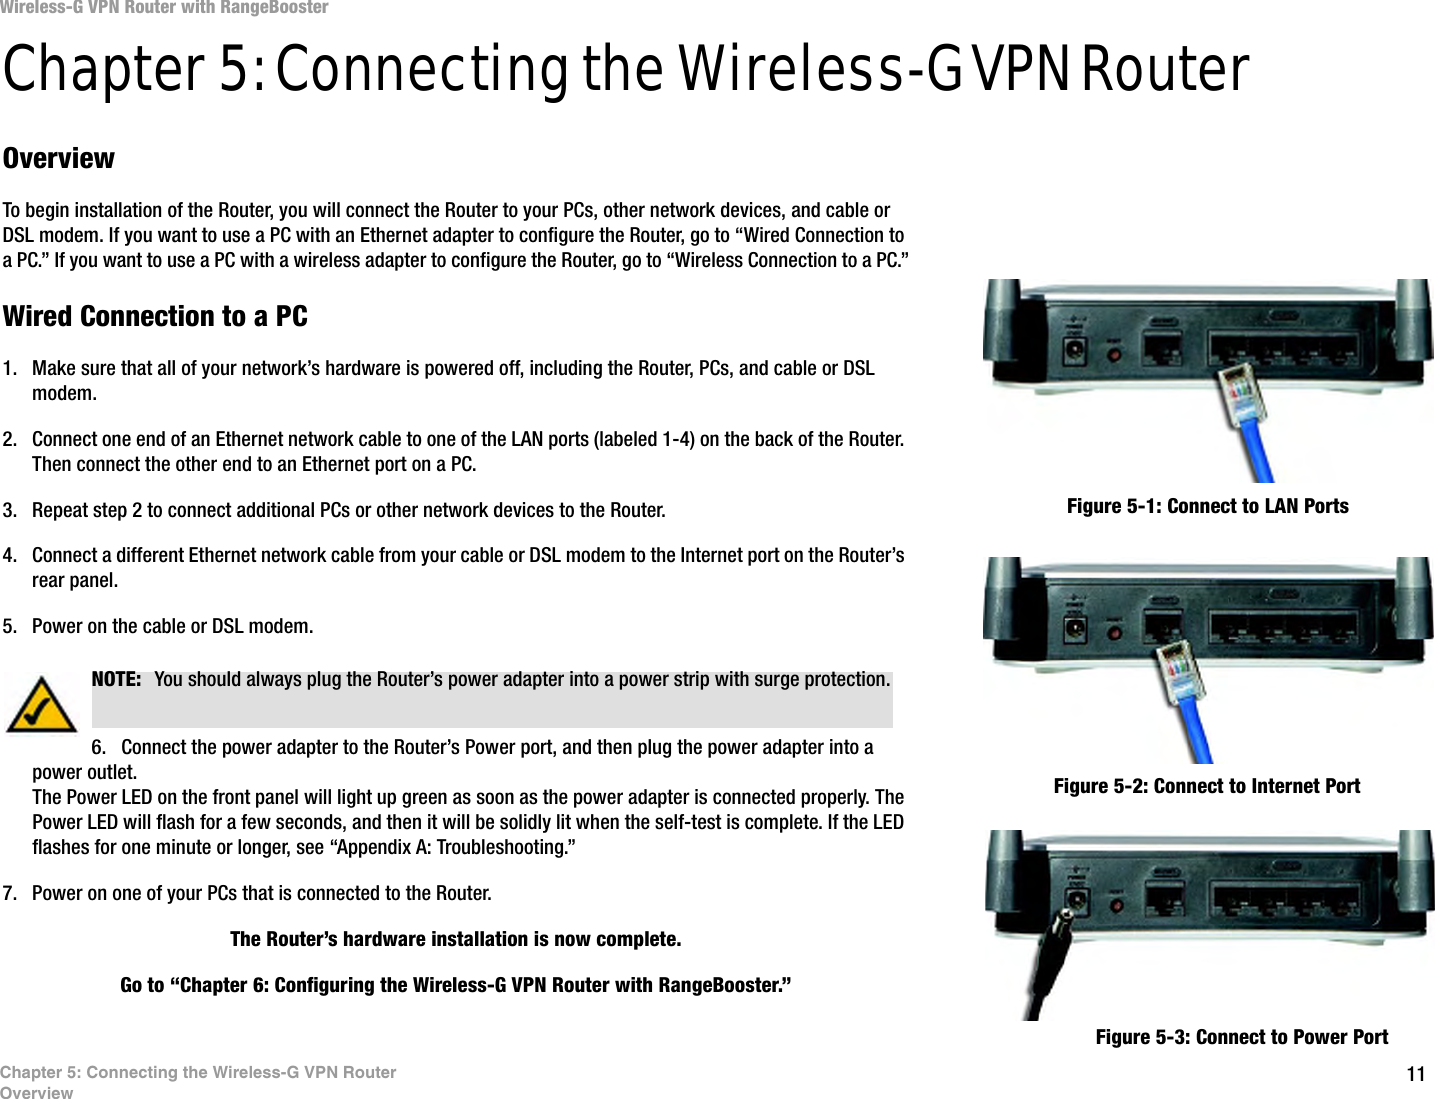 11Chapter 5: Connecting the Wireless-G VPN RouterOverviewWireless-G VPN Router with RangeBoosterChapter 5: Connecting the Wireless-G VPN RouterOverviewTo begin installation of the Router, you will connect the Router to your PCs, other network devices, and cable or DSL modem. If you want to use a PC with an Ethernet adapter to configure the Router, go to “Wired Connection to a PC.” If you want to use a PC with a wireless adapter to configure the Router, go to “Wireless Connection to a PC.”Wired Connection to a PC1. Make sure that all of your network’s hardware is powered off, including the Router, PCs, and cable or DSL modem.2. Connect one end of an Ethernet network cable to one of the LAN ports (labeled 1-4) on the back of the Router. Then connect the other end to an Ethernet port on a PC.3. Repeat step 2 to connect additional PCs or other network devices to the Router.4. Connect a different Ethernet network cable from your cable or DSL modem to the Internet port on the Router’s rear panel.5. Power on the cable or DSL modem.6. Connect the power adapter to the Router’s Power port, and then plug the power adapter into a power outlet.The Power LED on the front panel will light up green as soon as the power adapter is connected properly. The Power LED will flash for a few seconds, and then it will be solidly lit when the self-test is complete. If the LED flashes for one minute or longer, see “Appendix A: Troubleshooting.”7. Power on one of your PCs that is connected to the Router.The Router’s hardware installation is now complete. Go to “Chapter 6: Configuring the Wireless-G VPN Router with RangeBooster.”Figure 5-2: Connect to Internet PortFigure 5-1: Connect to LAN PortsFigure 5-3: Connect to Power PortNOTE:  You should always plug the Router’s power adapter into a power strip with surge protection.